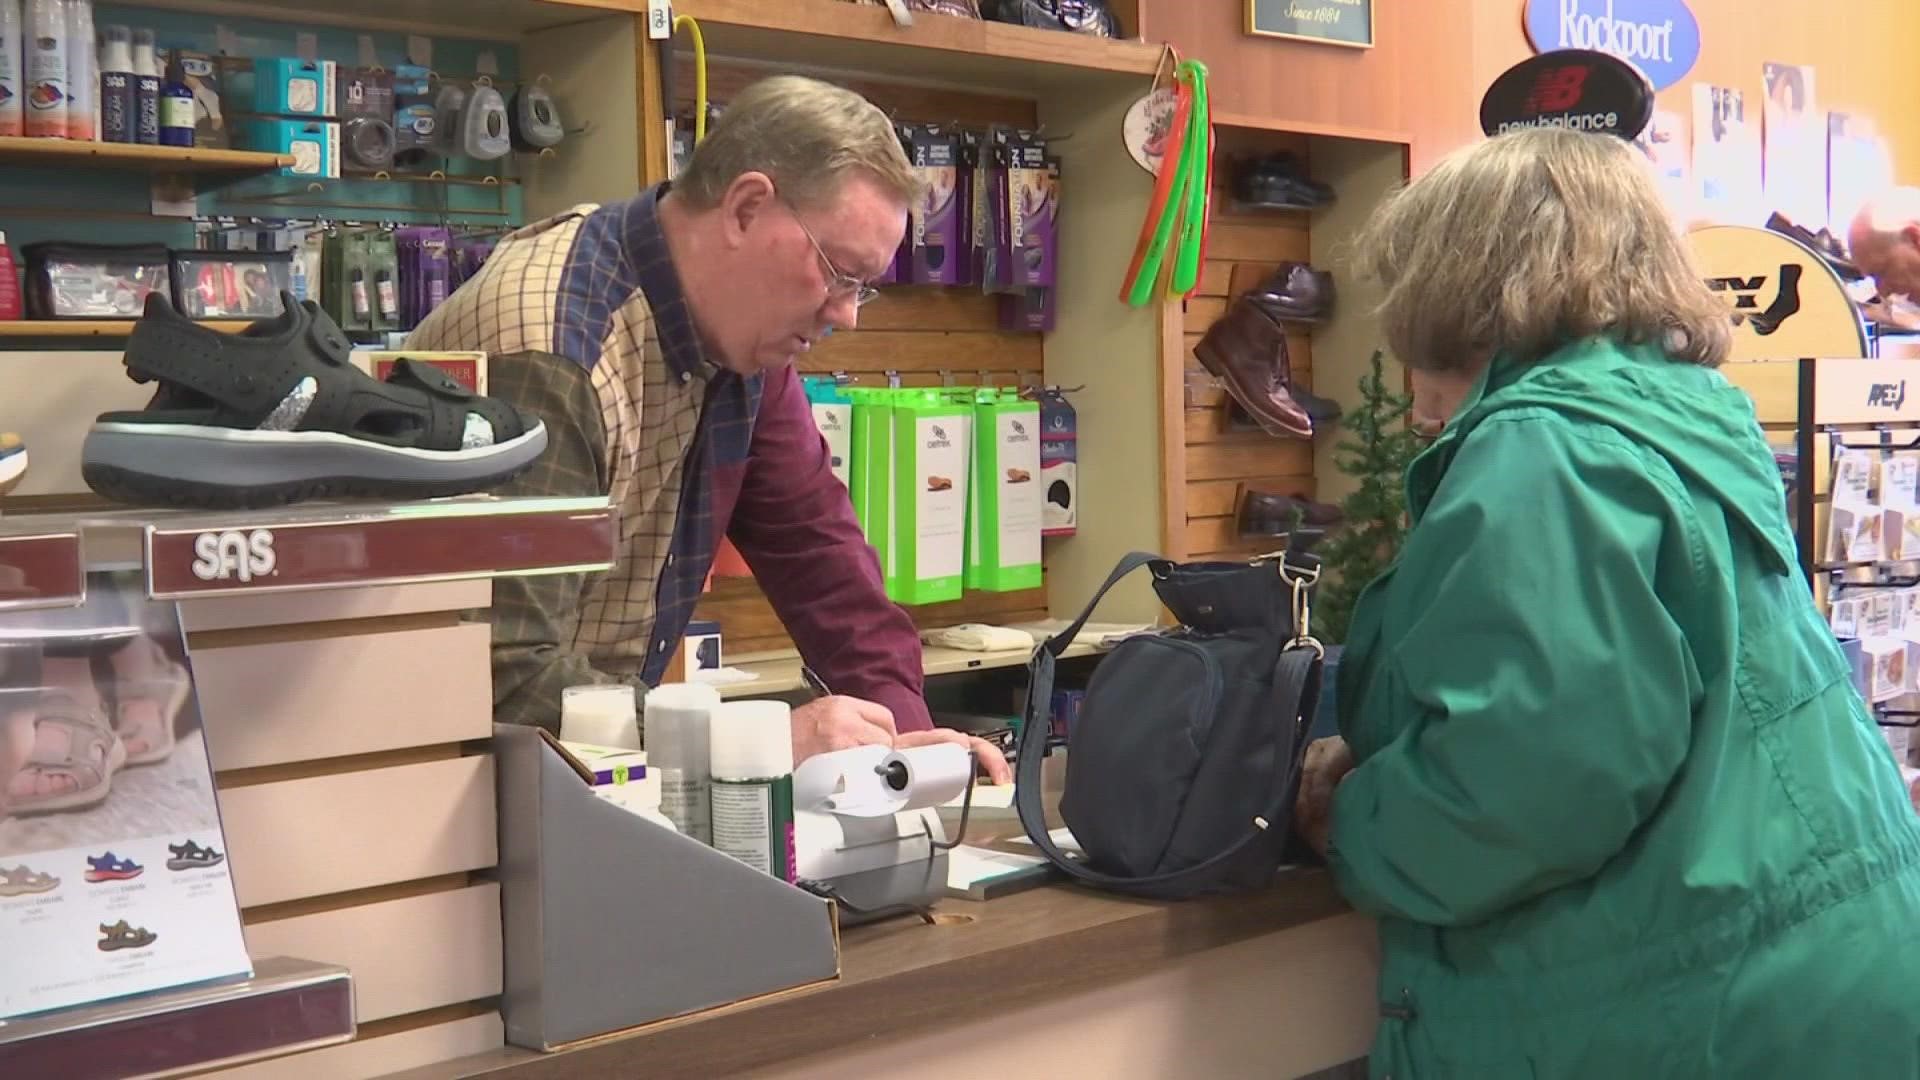 10TV's Kiona Dyches spoke to the owners of a shoe store in Upper Arlington who are closing their doors after decades in the business.